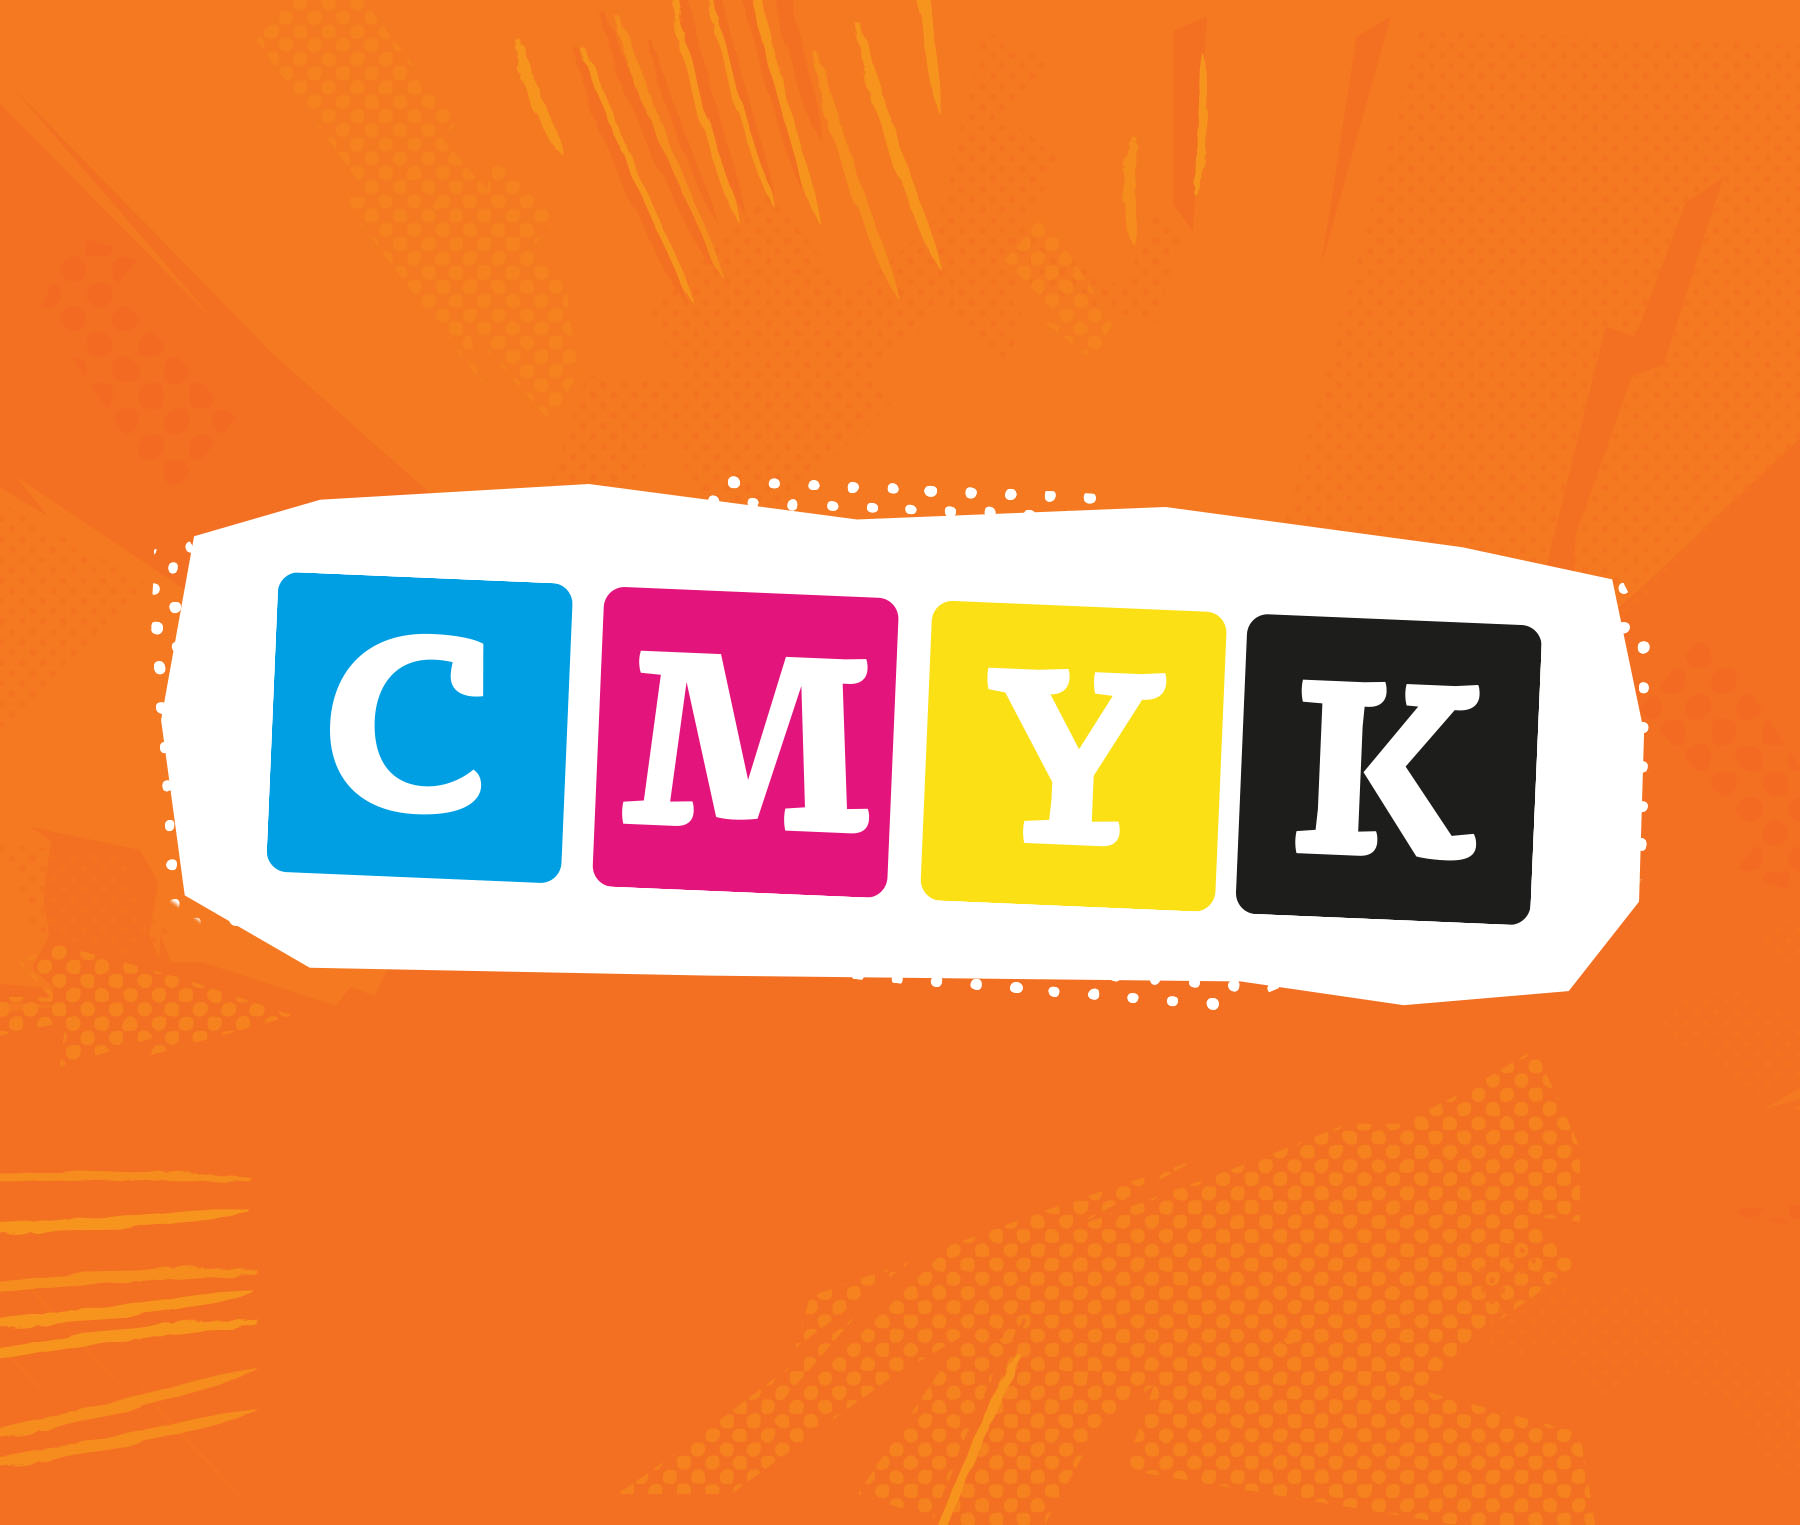 featured-image cmyk